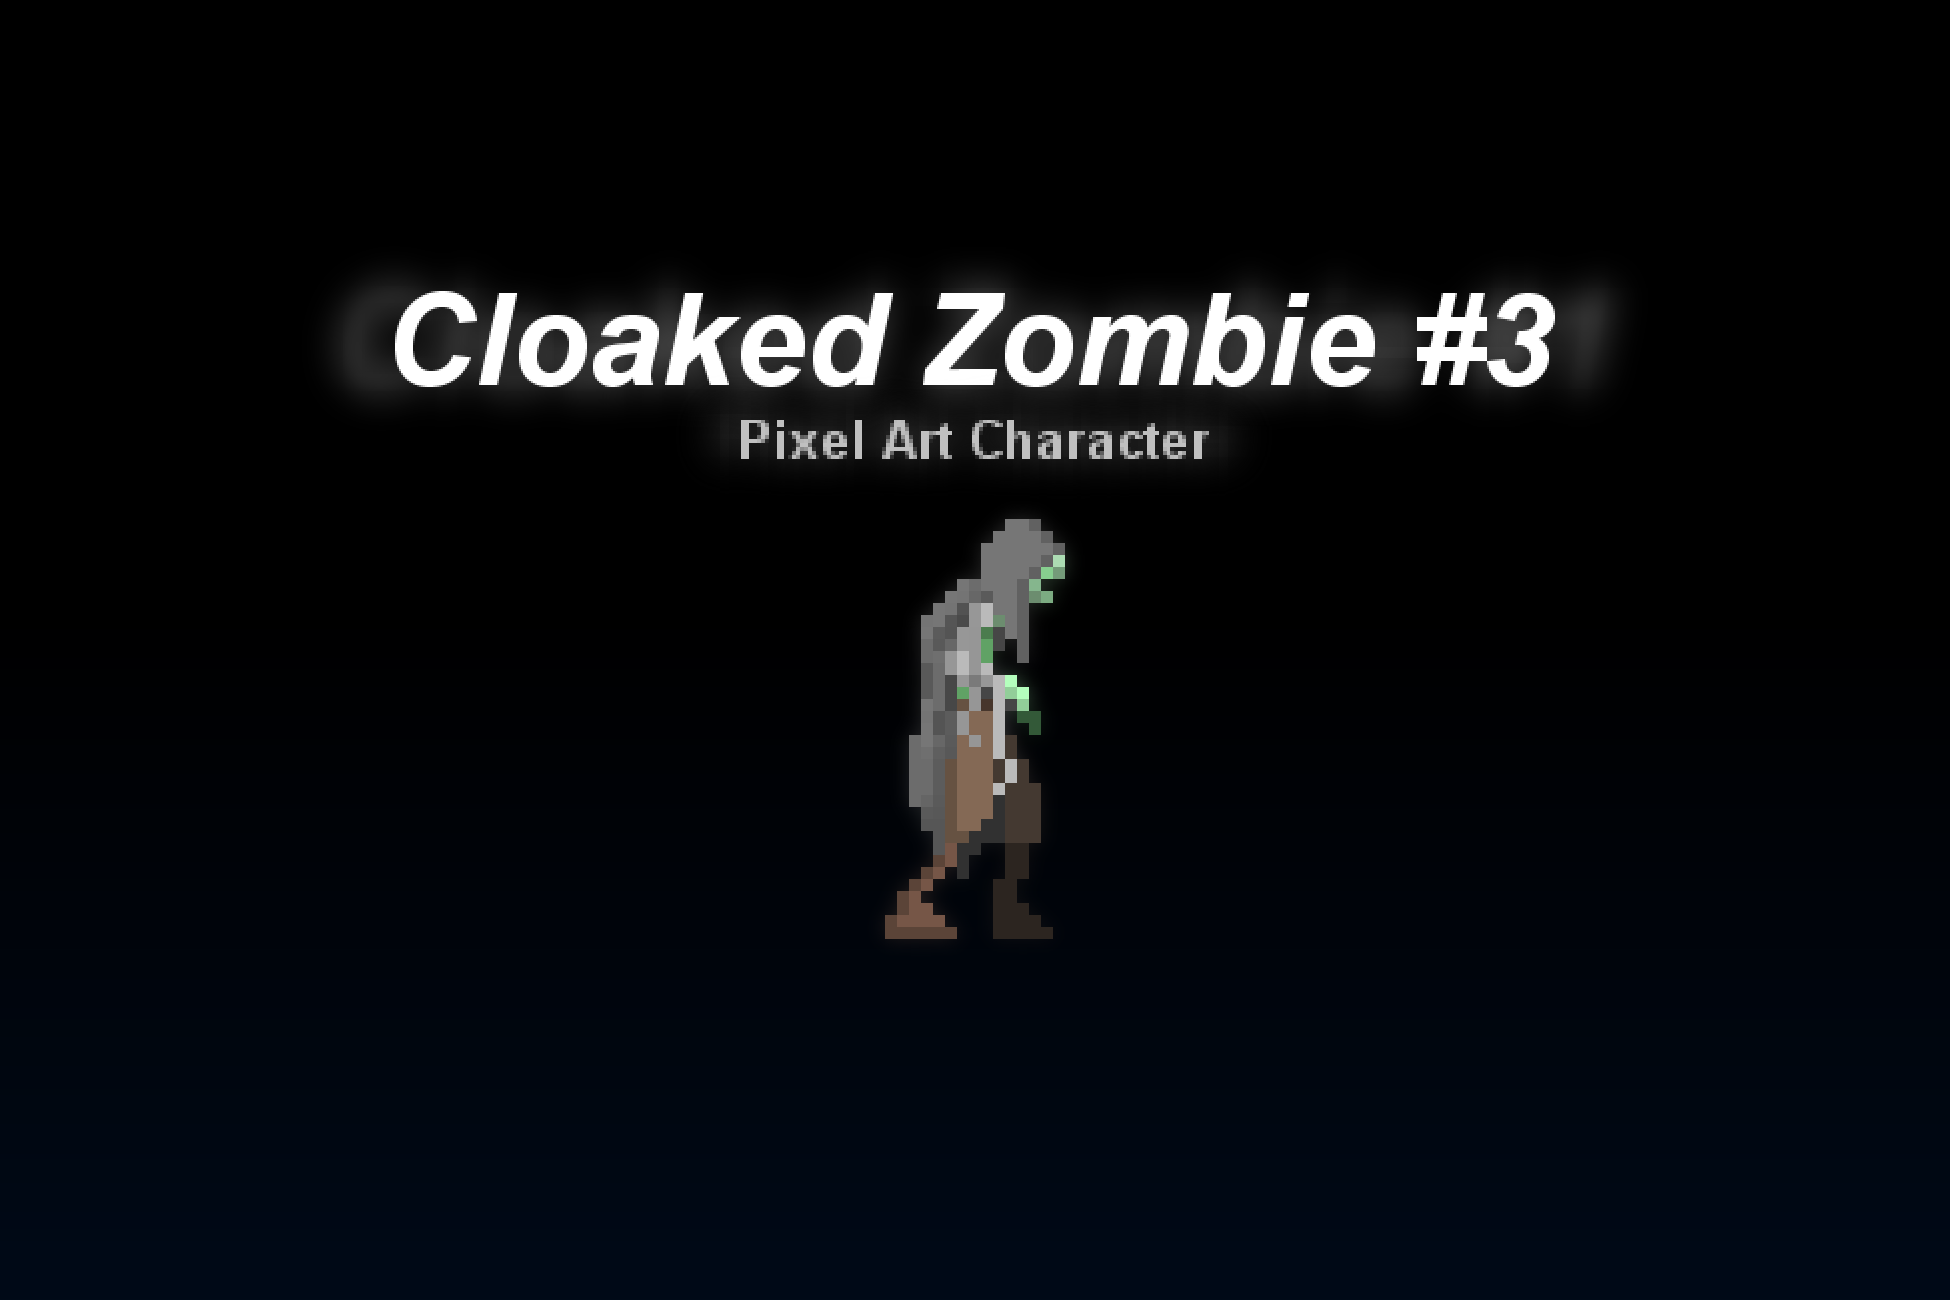 Cloaked Zombie #3 - Pixel Art Character